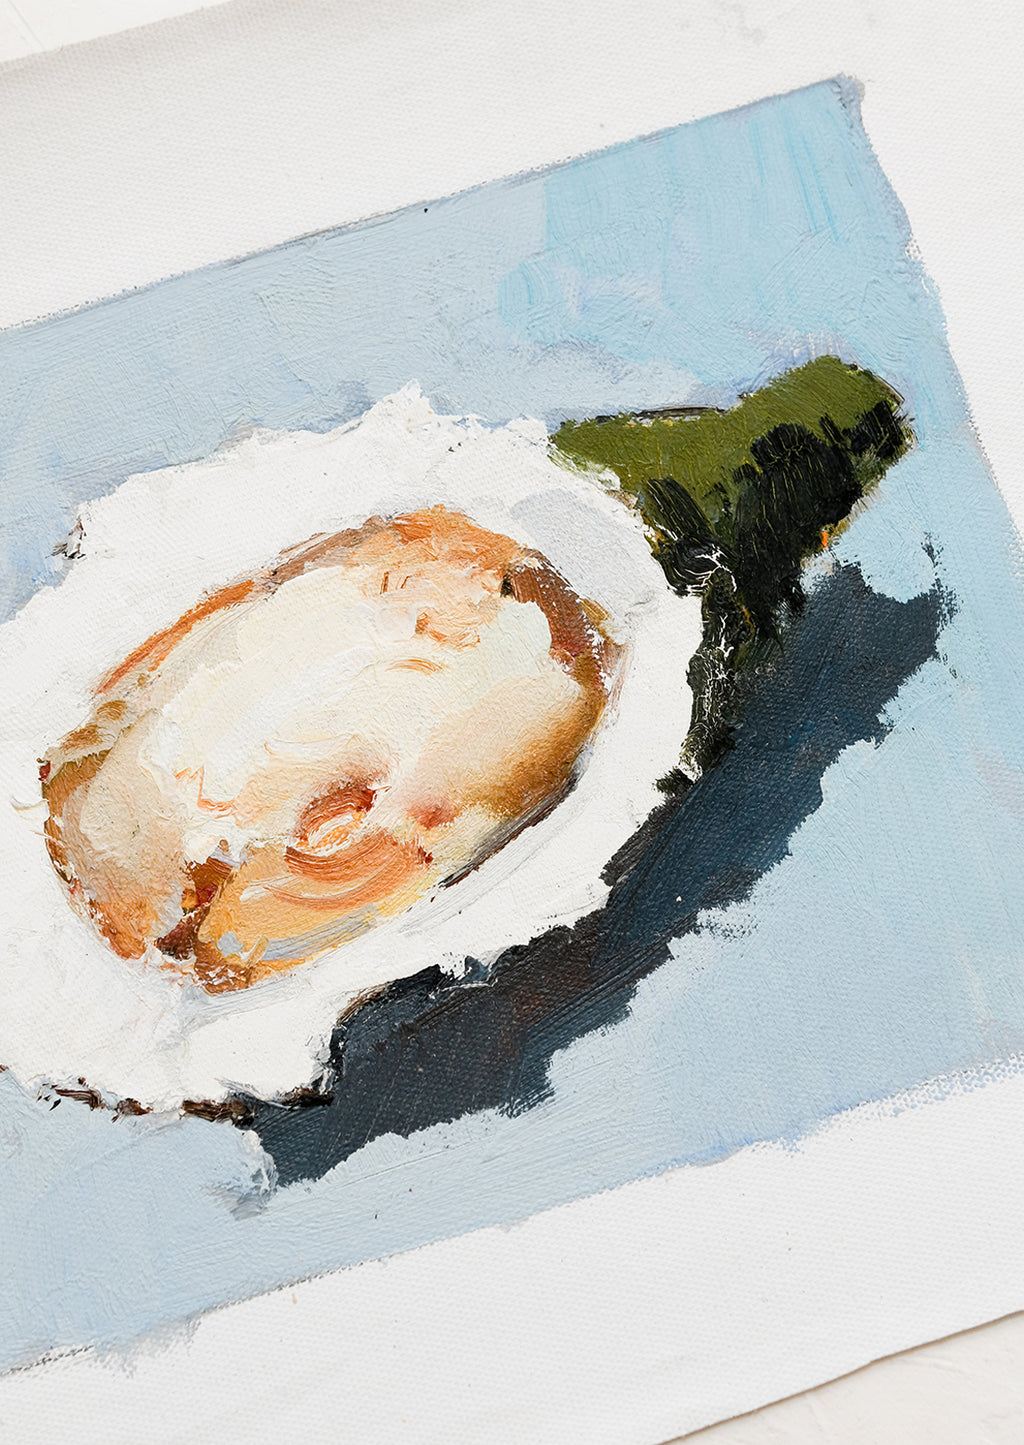 2: An original oil painting on unstretched canvas of oyster still life on blue background.